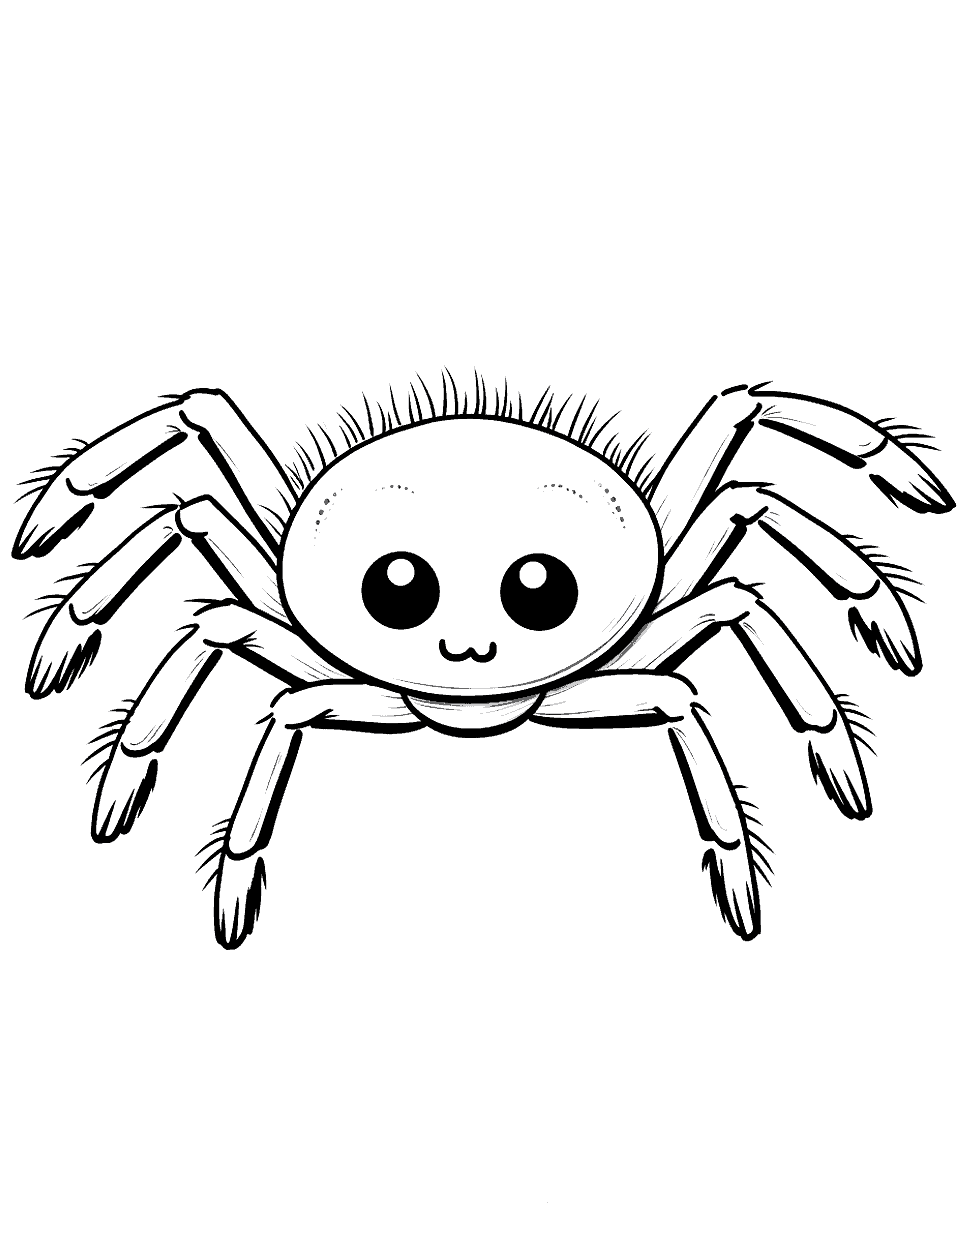 Baby Spider's First Web Spider Coloring Page - A small, baby spider trying to spin its first web.